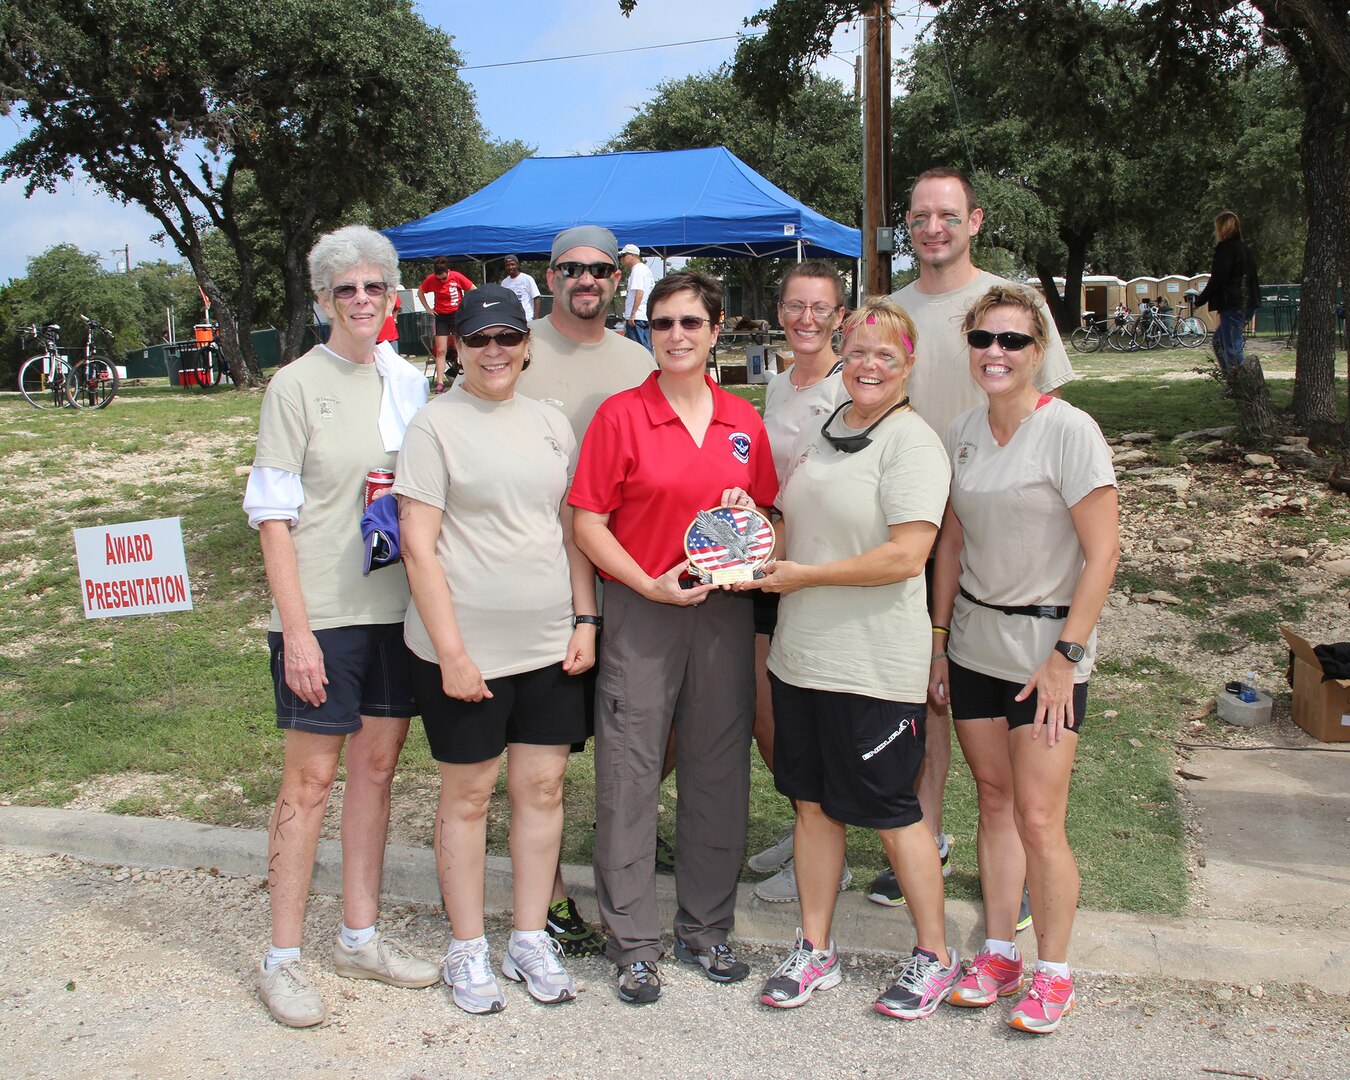 Brig. Gen. Theresa Carter, Joint Base San Antonio and 502nd Air Base Wing Commander, (center) presents the Most Mature Team award to the 50 Shades of Green team Oct. 20 at Joint Base San Antonio Recreation Park, Canyon Lake, Texas.  Pictured from left are: Pat Higgins, Sonia Rivera, John Meyer, Sue Wilson, Jo Grandelli, Larry Smedley and Tina McDaniel. The seventh annual Rambler 120 includes a 22-mile bike course, a 6-mile run and a 2-mile rafting course. (U.S. Air Force photo by Dan J. Solis) 